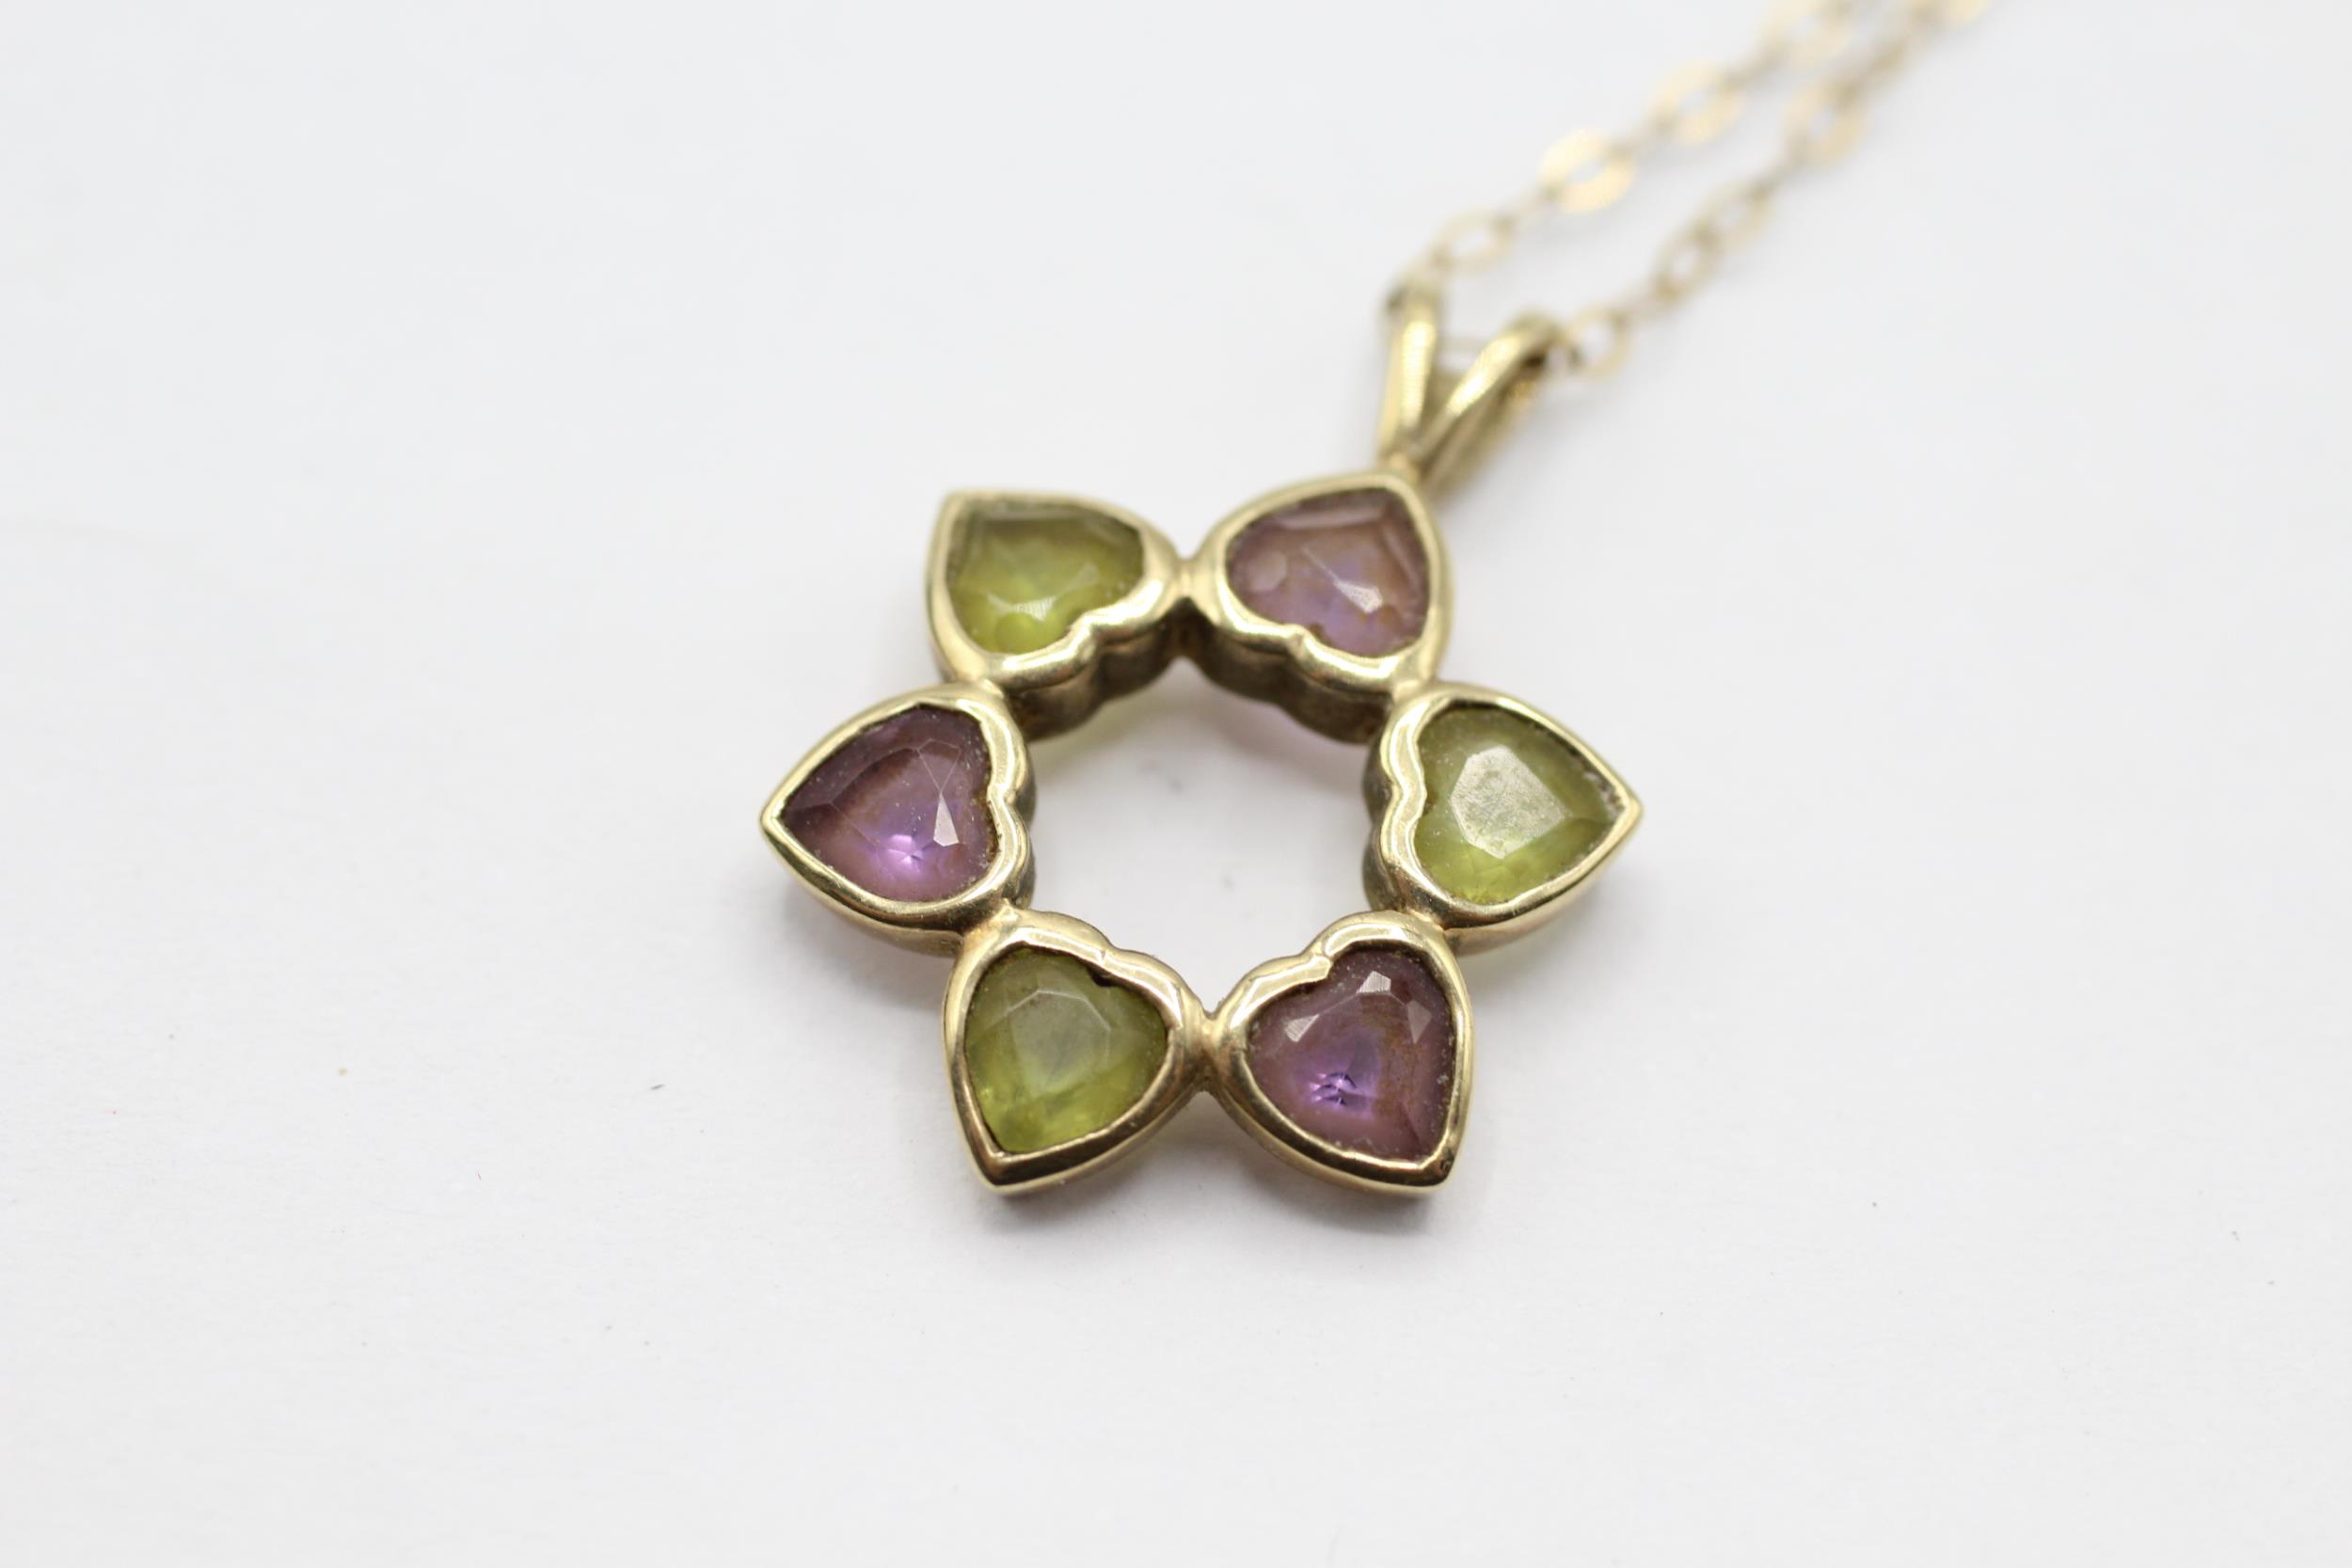 9ct gold heart-shaped peridot & amethyst floral cluster pendant - 2.1 g - Image 2 of 4